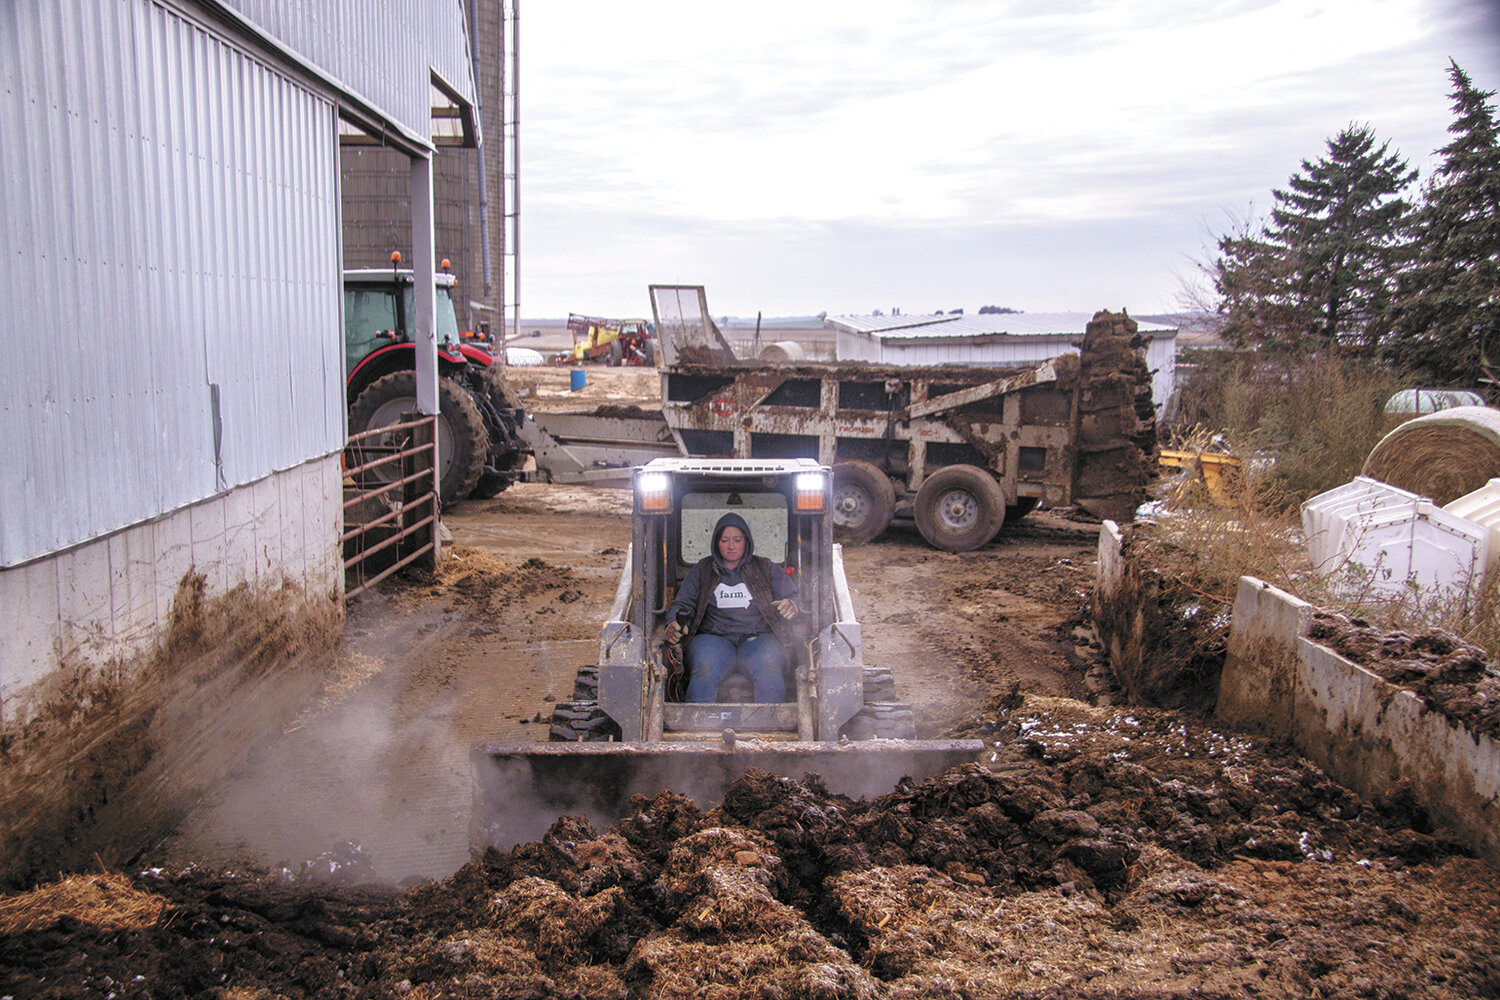 Mindy Burkle scoops up manure with a skid loader Nov. 1 at the Burkle family farm near Earlville, Iowa. Burkle returned home after college to farm full time with her dad.